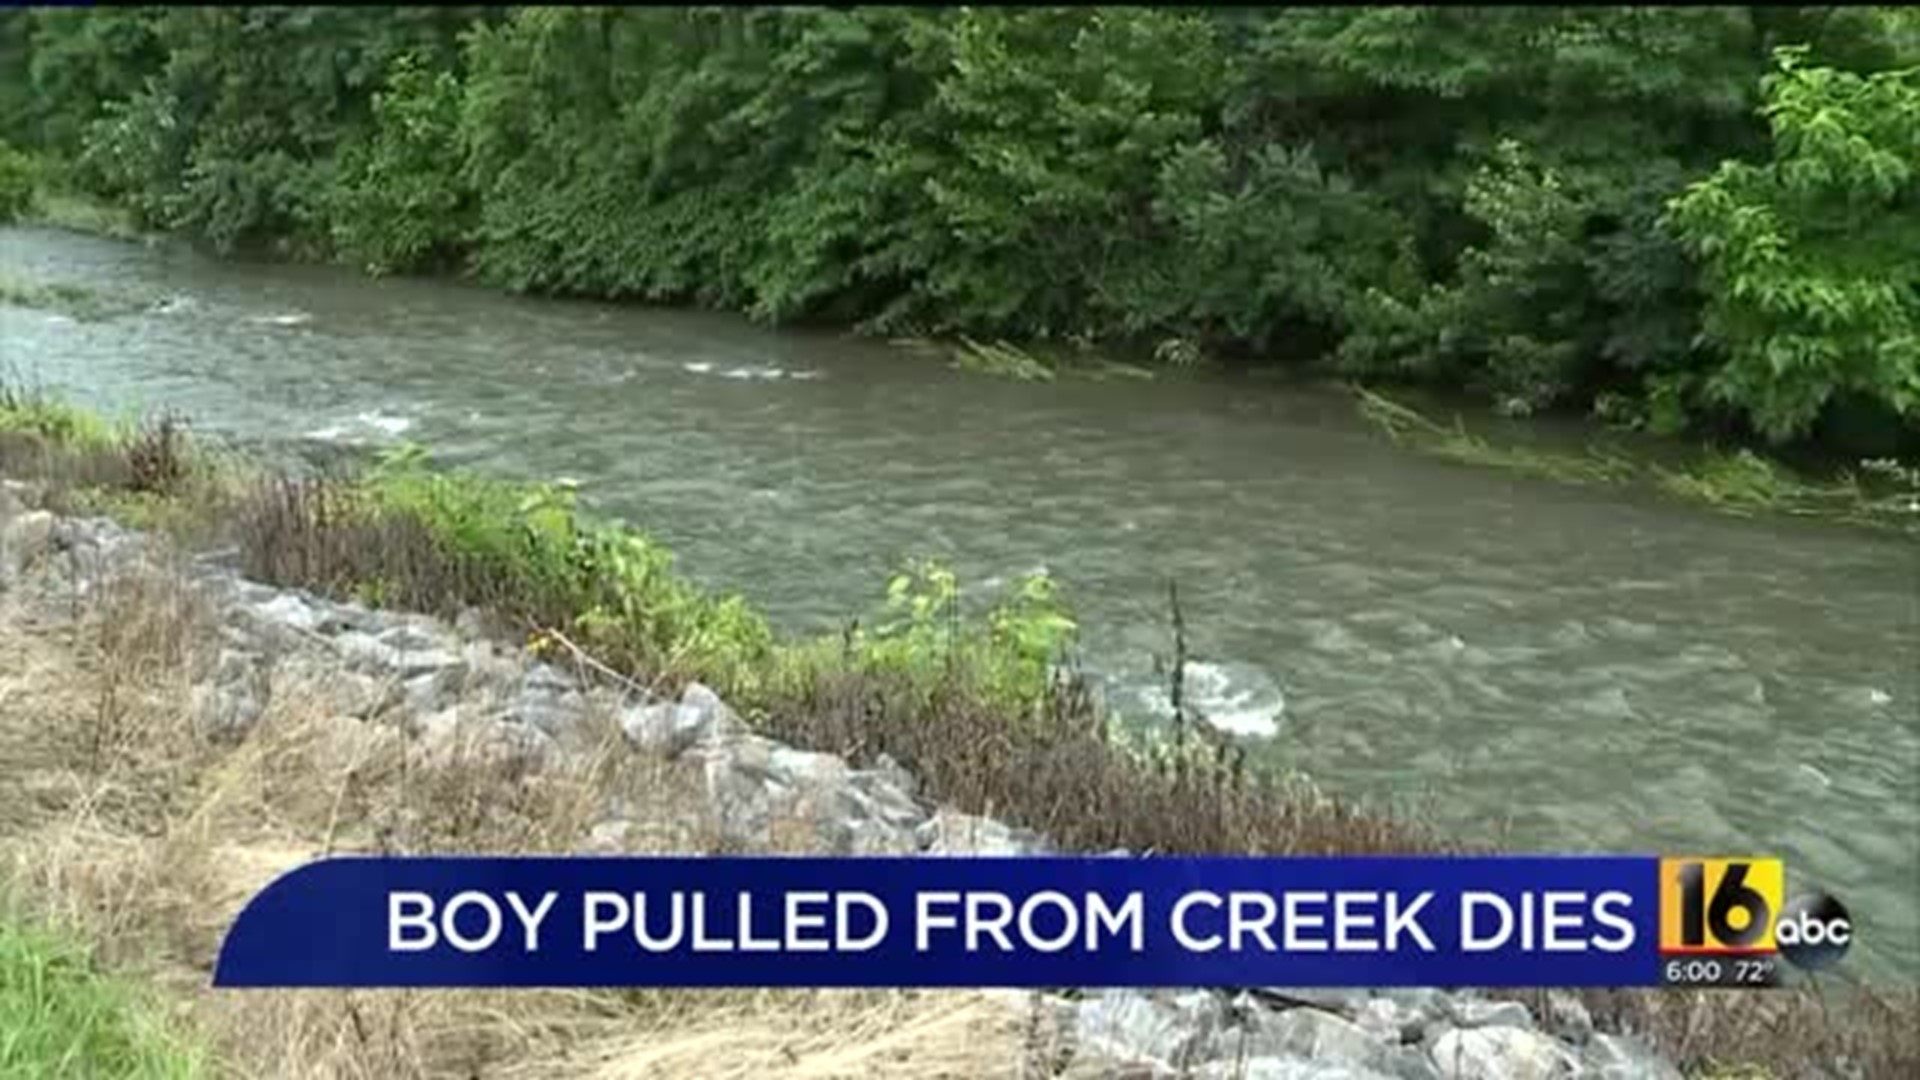 Young Boy Dies After Slipping and Falling Into Creek